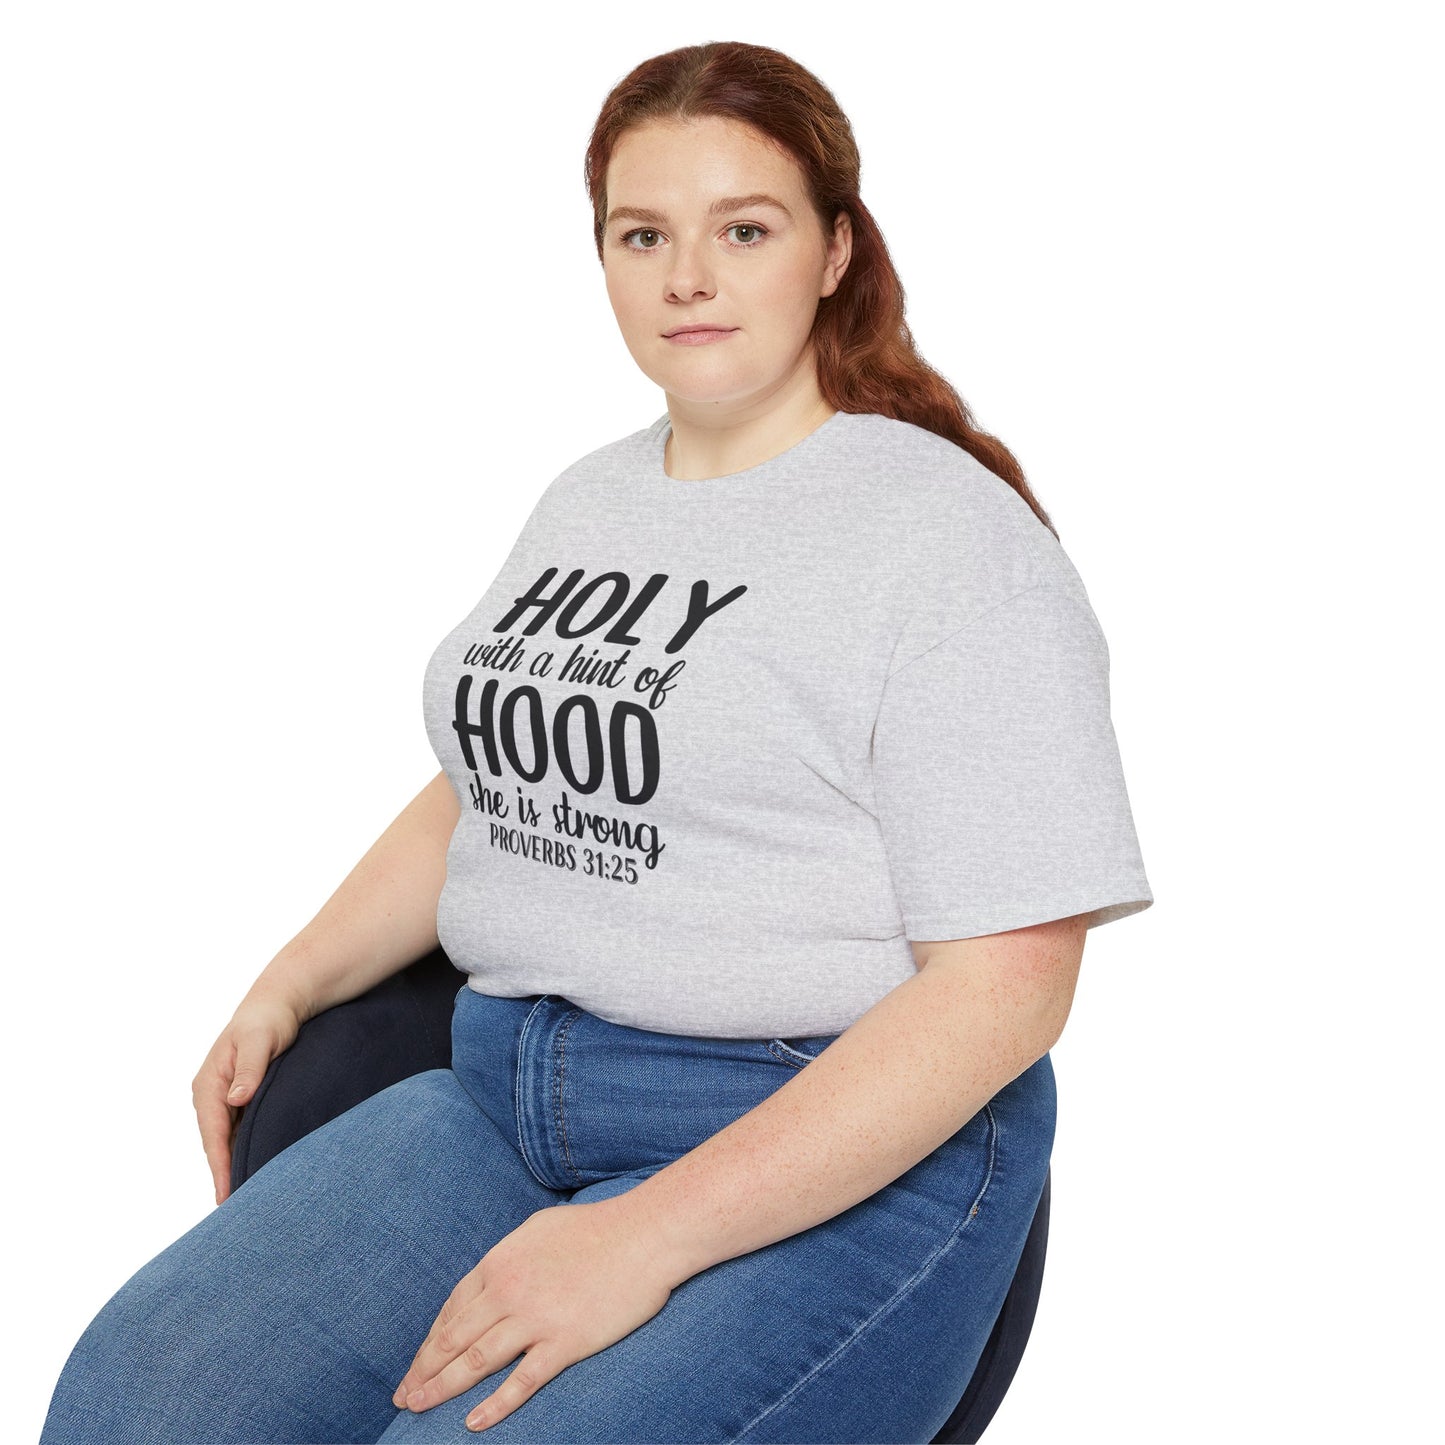 Holy With A Hint Of Hood She Is Strong Unisex Christian Ultra Cotton Tee Printify